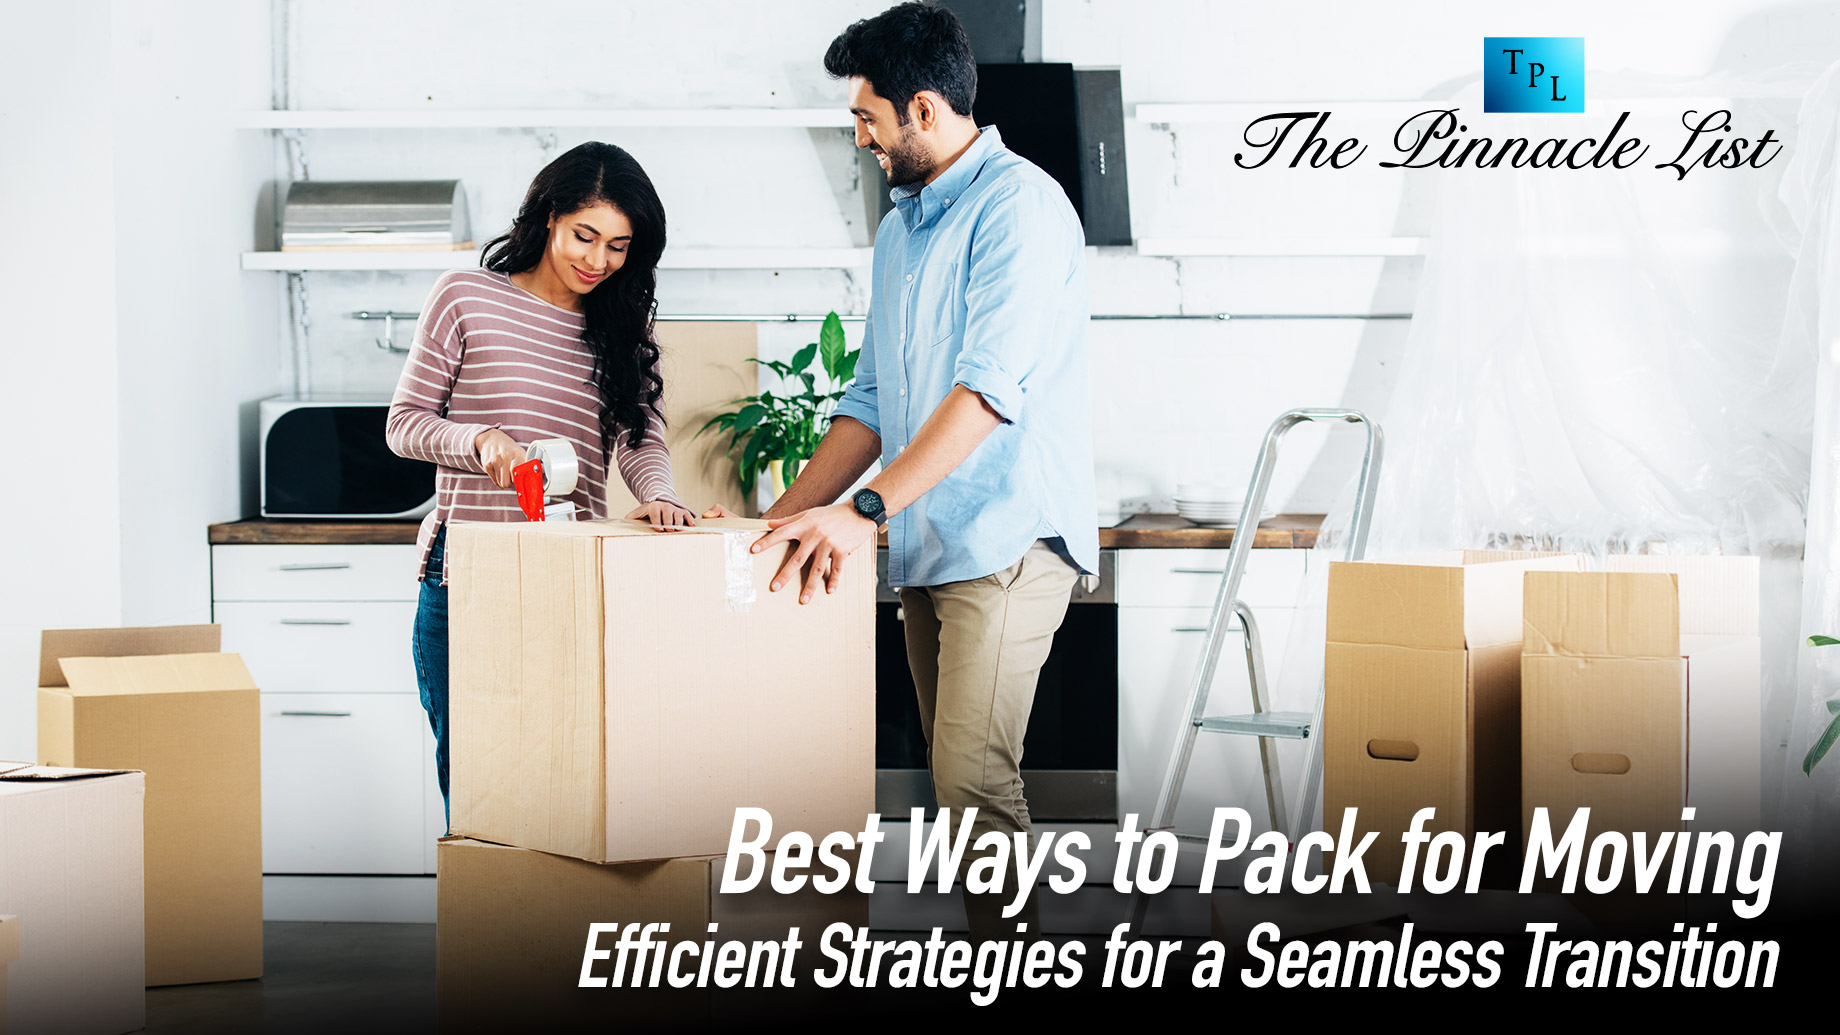 Best Ways to Pack for Moving: Efficient Strategies for a Seamless Transition